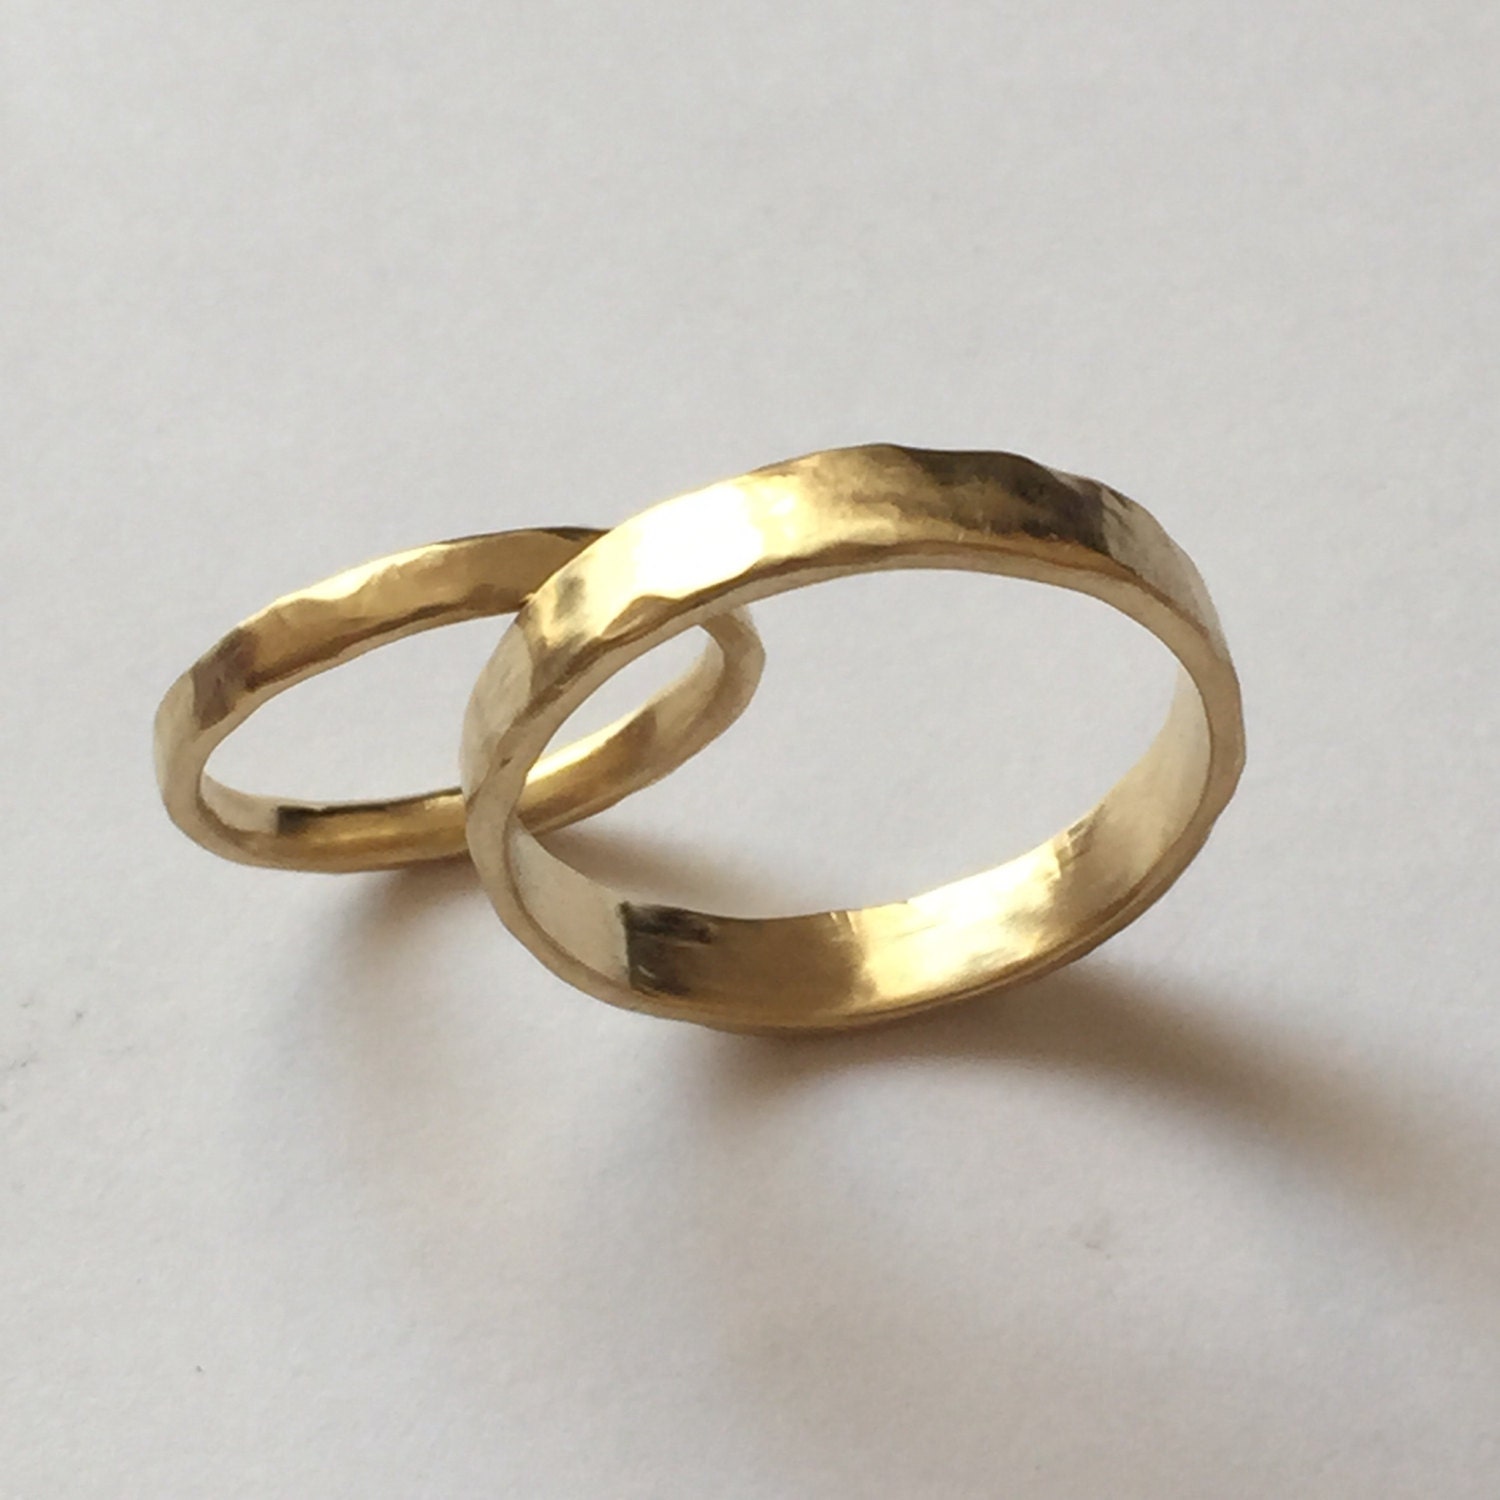 Two Organic Shape Gold Rings Wedding Ring Set Two Textured